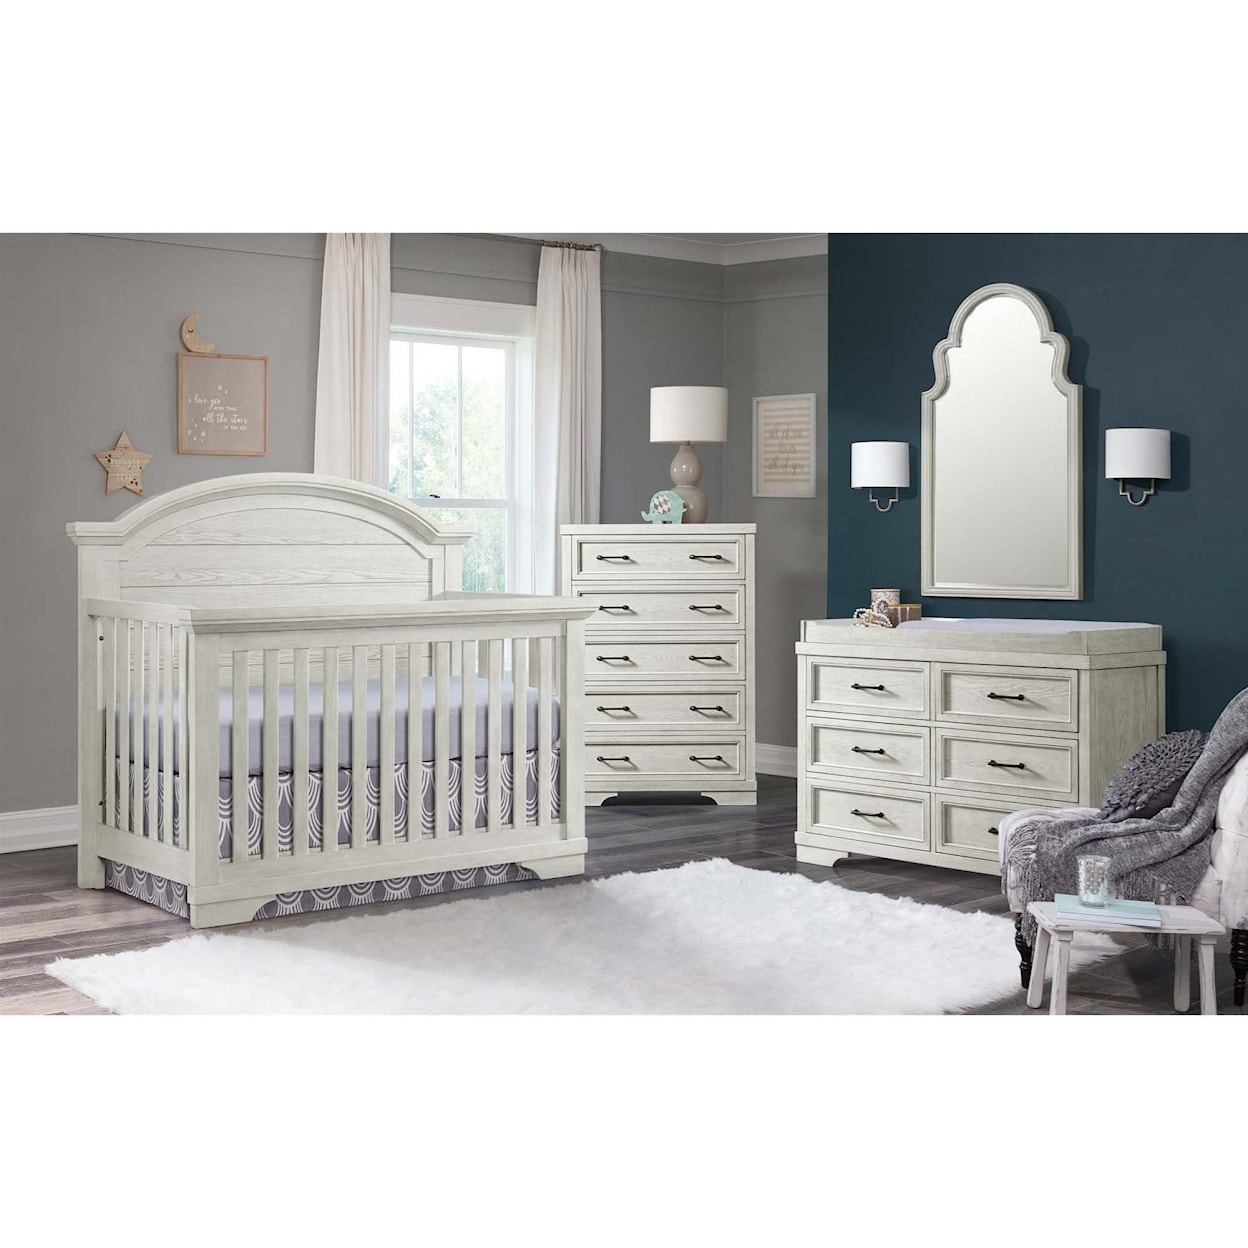 Westwood Design Foundry Baby Bedroom Group with Crib